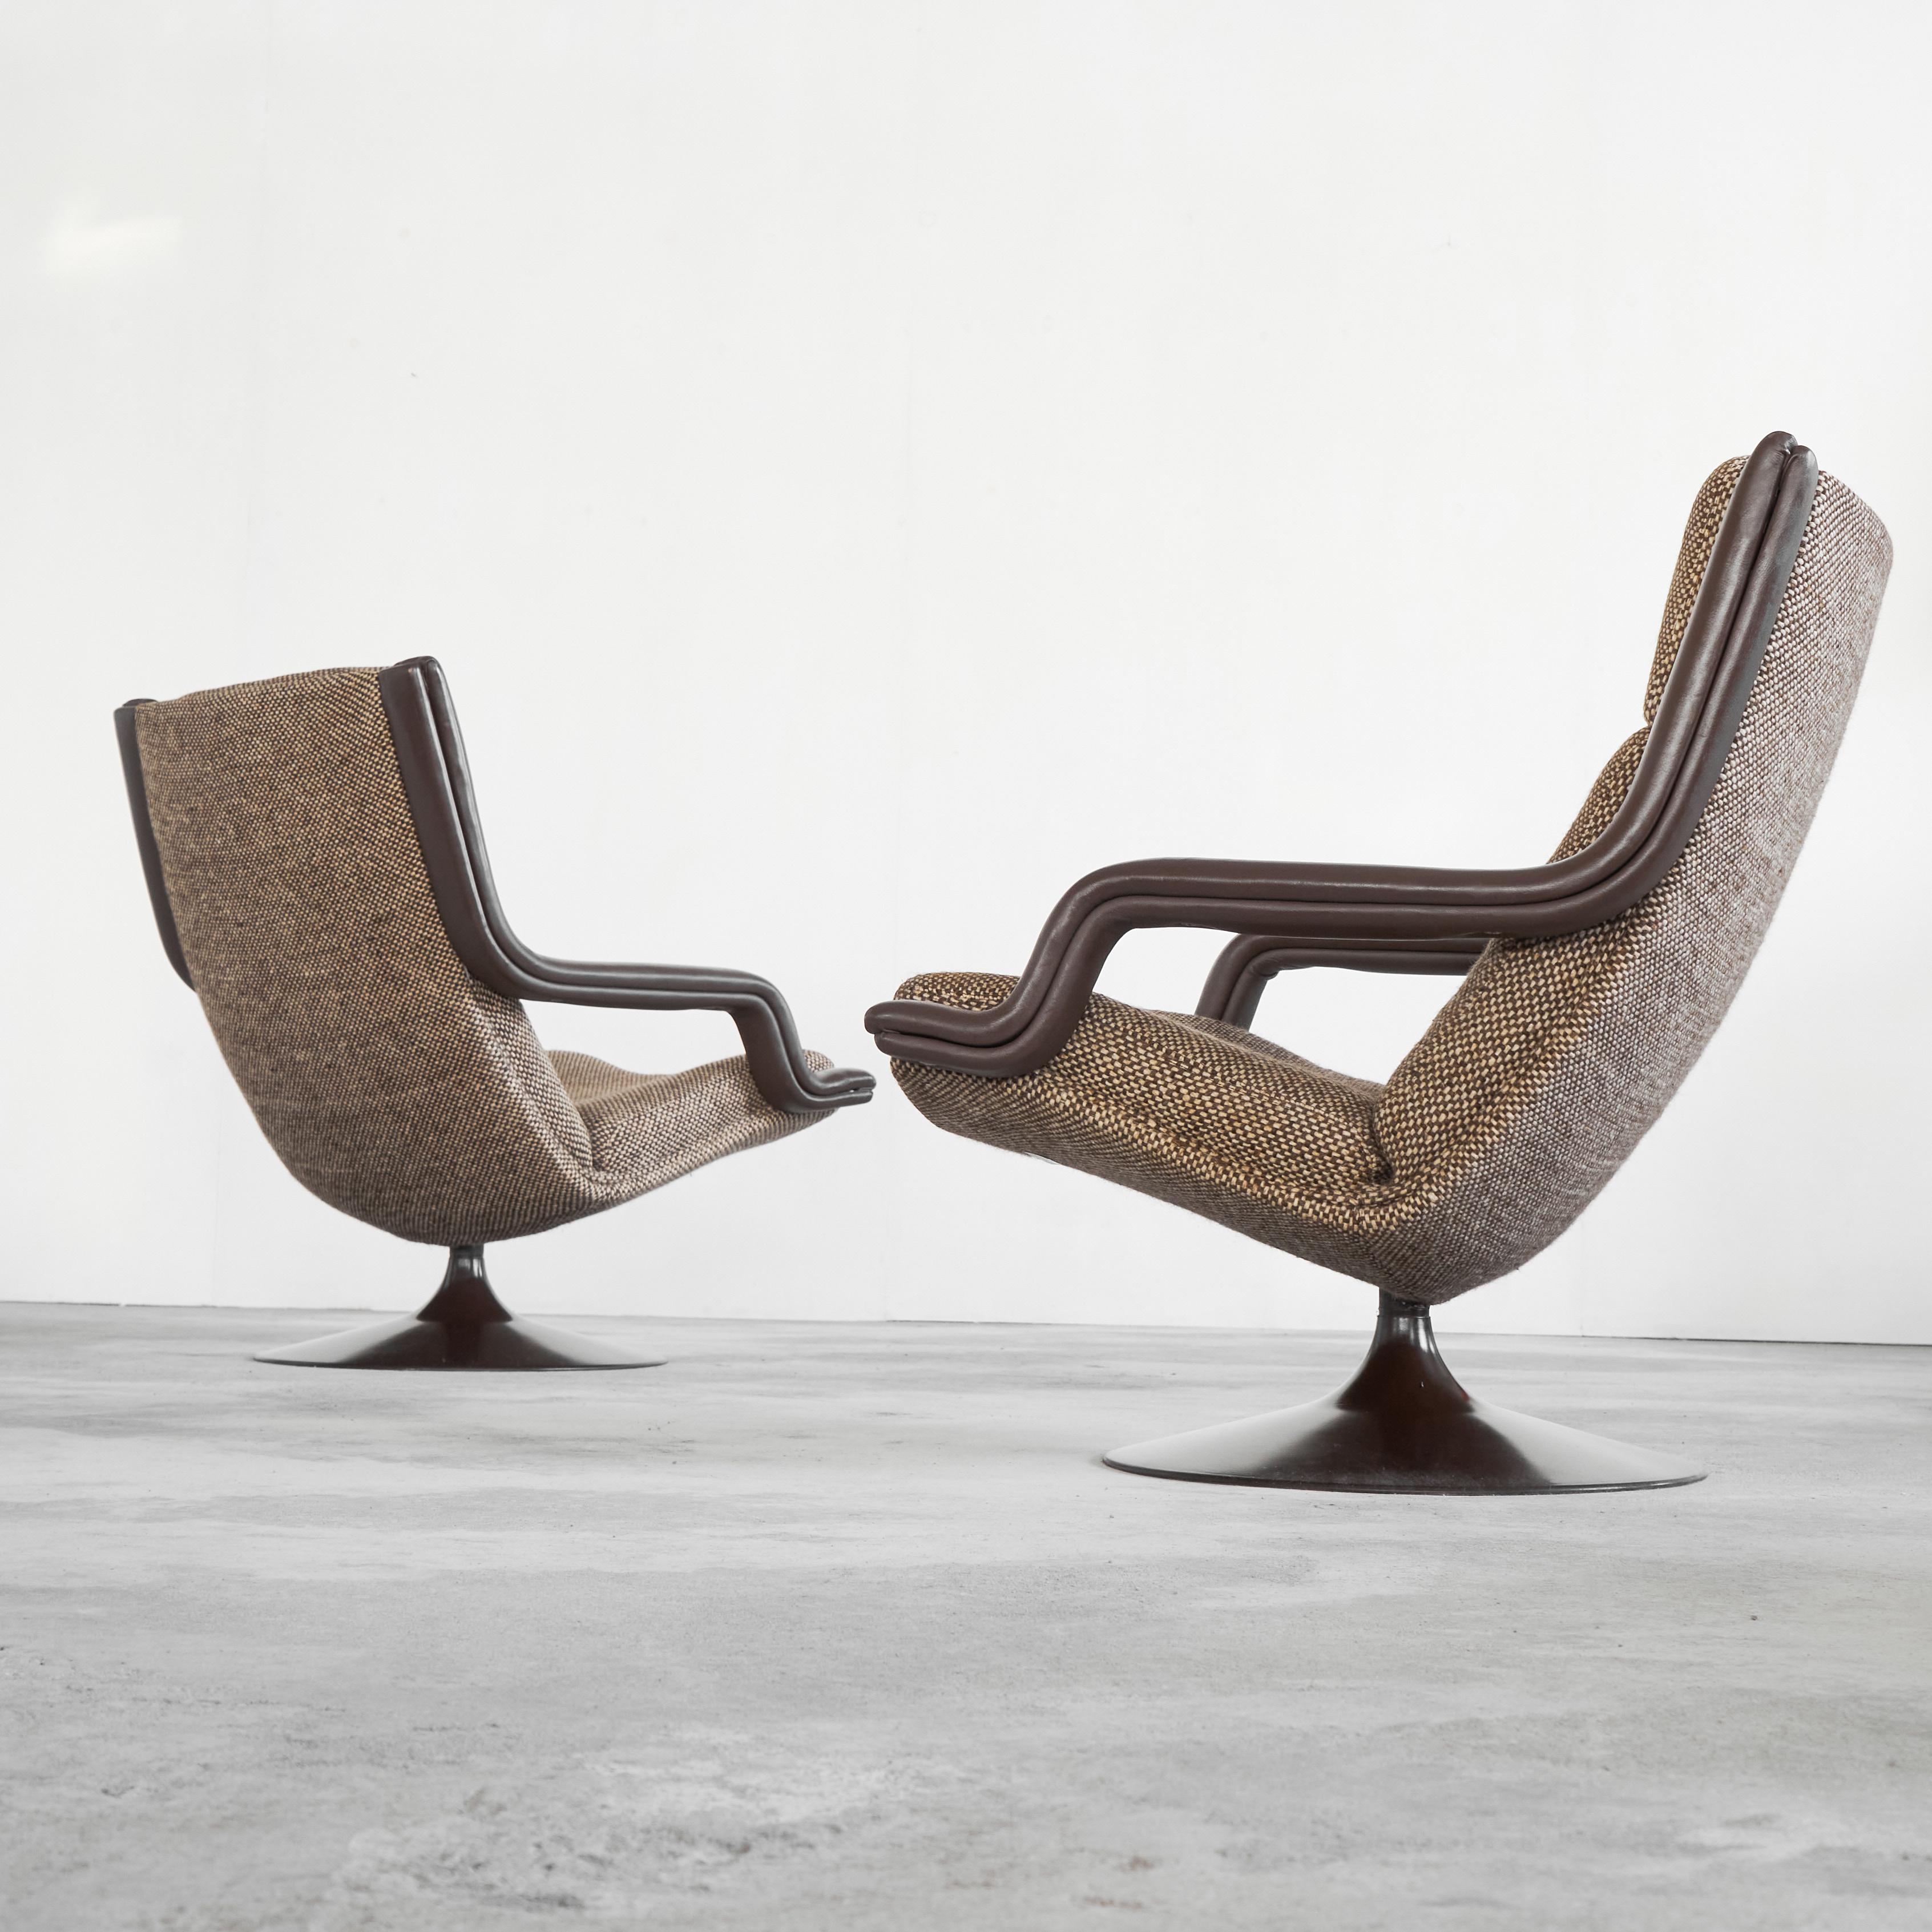 Geoffrey Harcourt Pair of F152 Lounge Chairs with Ottoman for Artifort 1975 For Sale 7